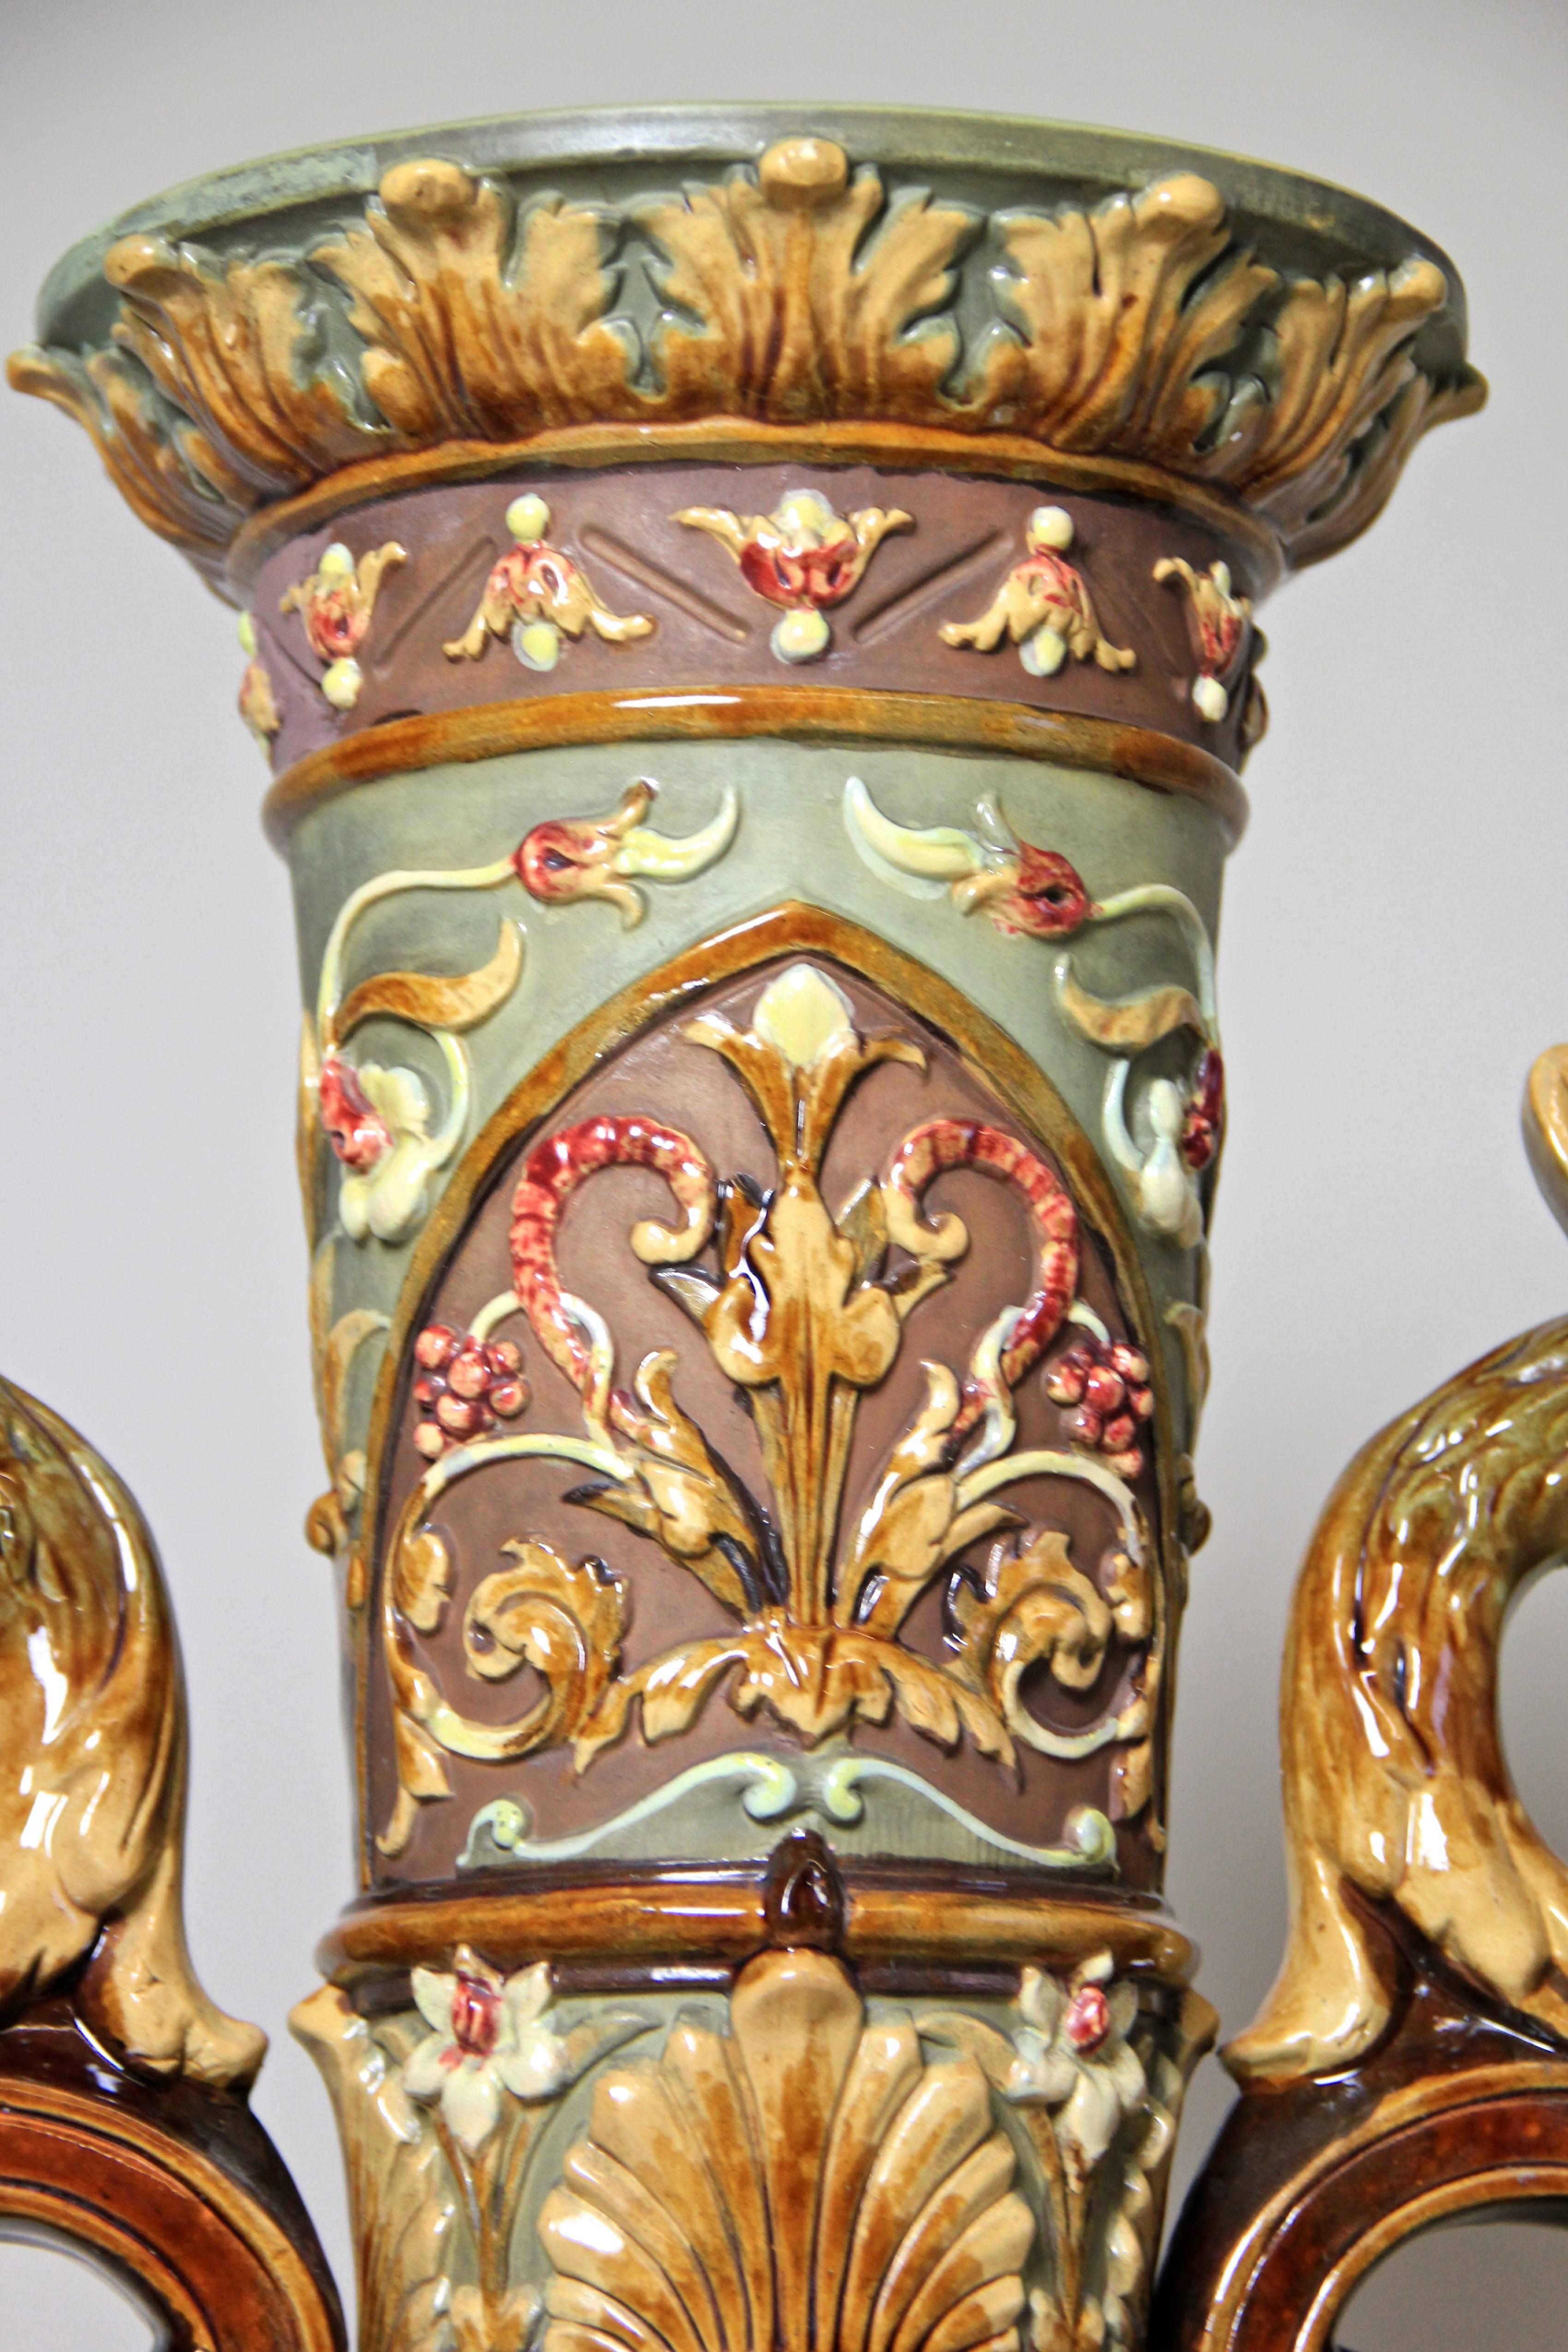 Remarkable large Majolica vase coming from the world famous Majolica manufactory of Wilhelm Schiller & Son in Bohemia, circa 1880. An outstanding, rare piece of majolica art, made in perfection by taking greatest care to details: just watch the